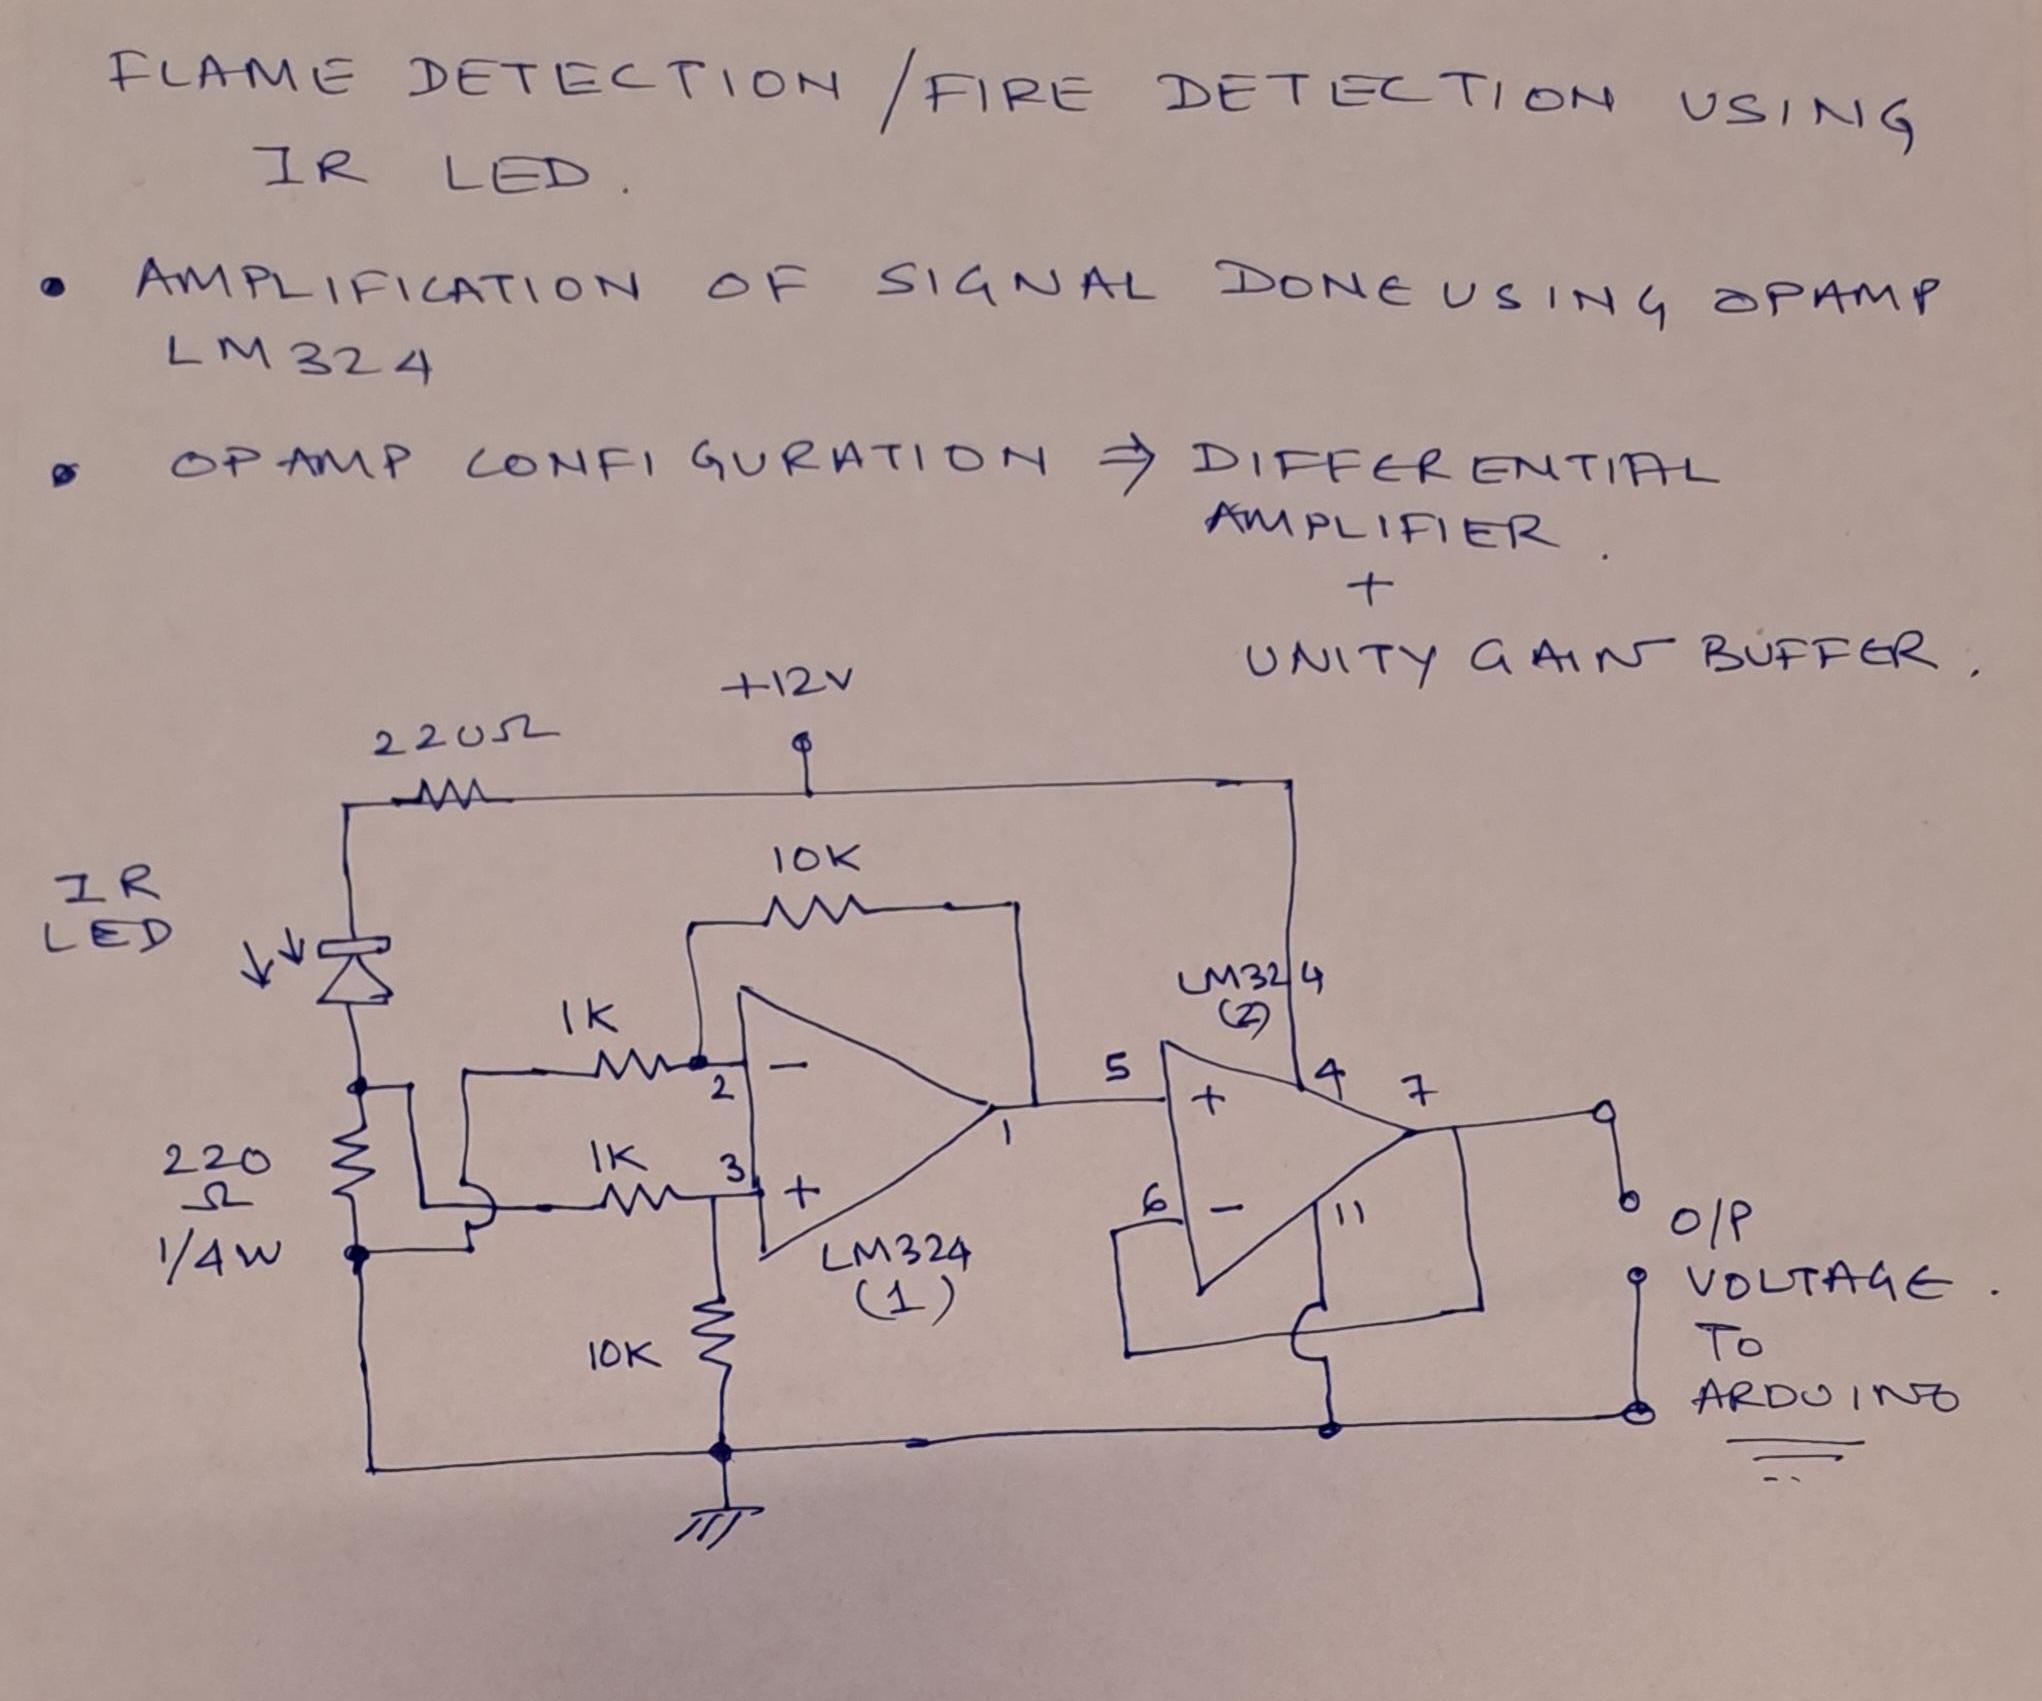 Infrared Flame Monitoring / Fire Monitoring Flame Scanner Device Using Arduino Uno. IR Diode Application. IR Data With Arduino Uno.